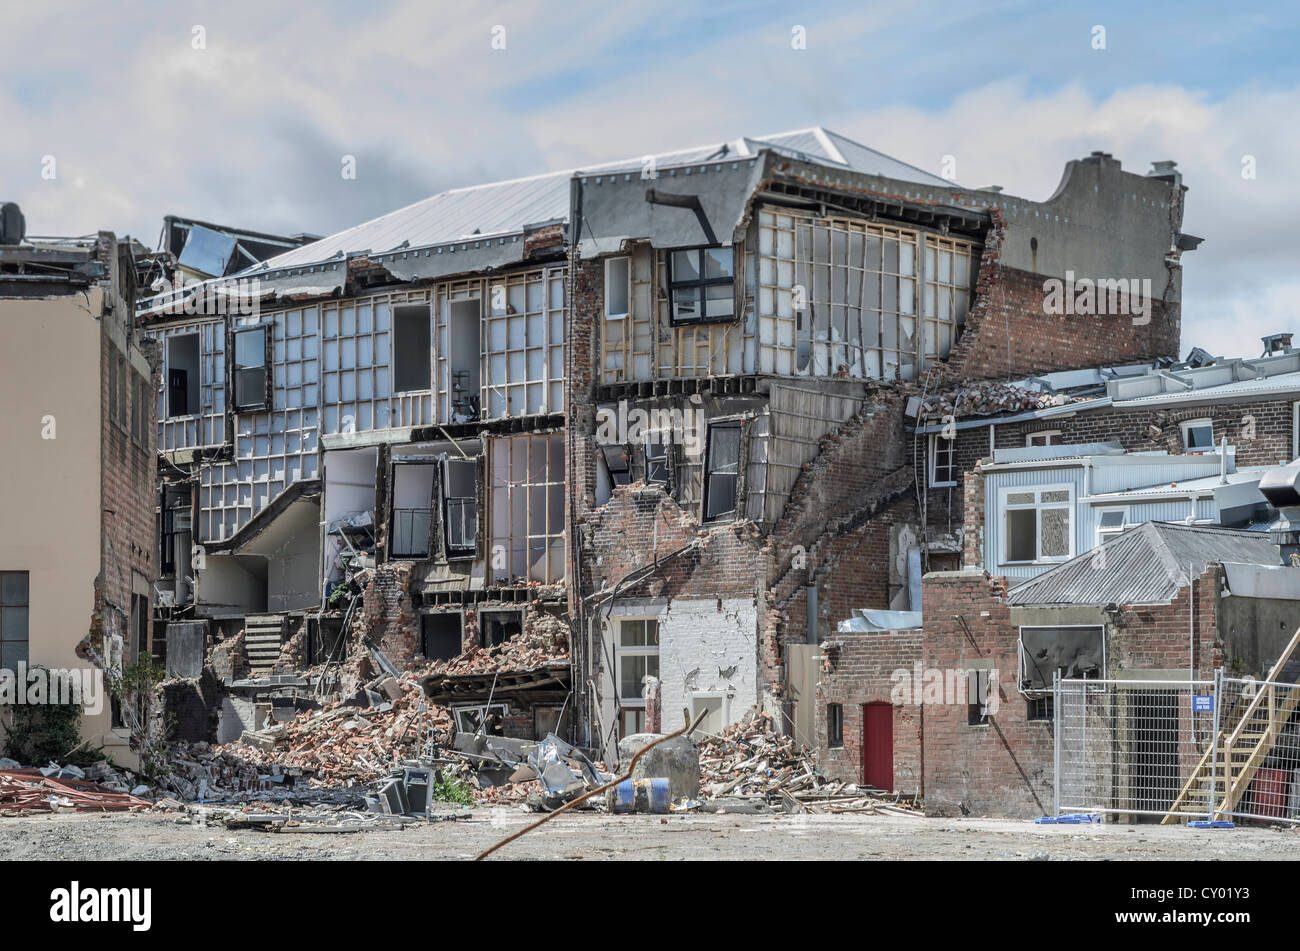 Severely destroyed house by the earthquake in the cordoned off town centre of the Christchurch earthquake zone, South Island Stock Photo